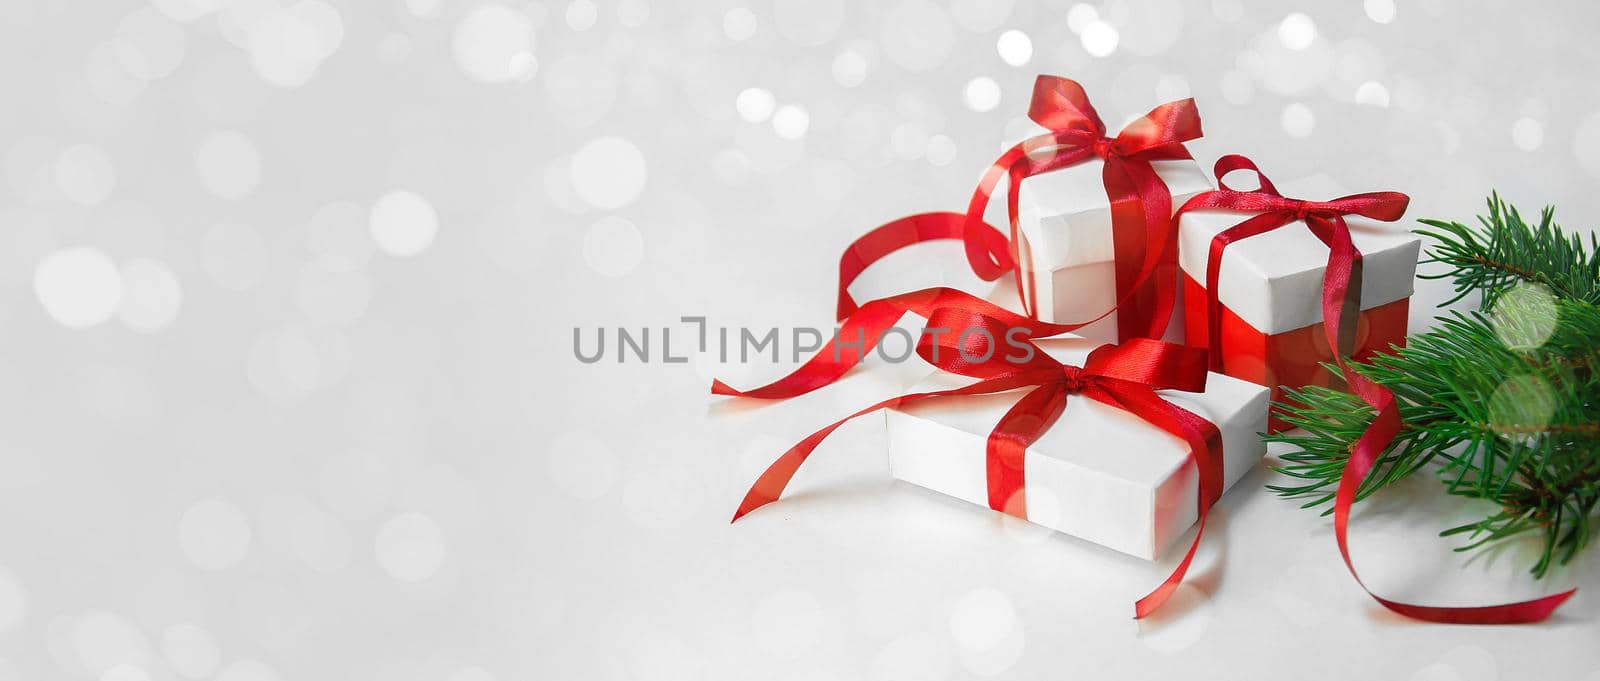 Christmas Gift's in White Box with Red Ribbon on Light Background. New Year Holiday Composition Banner. Copy Space For Your Text